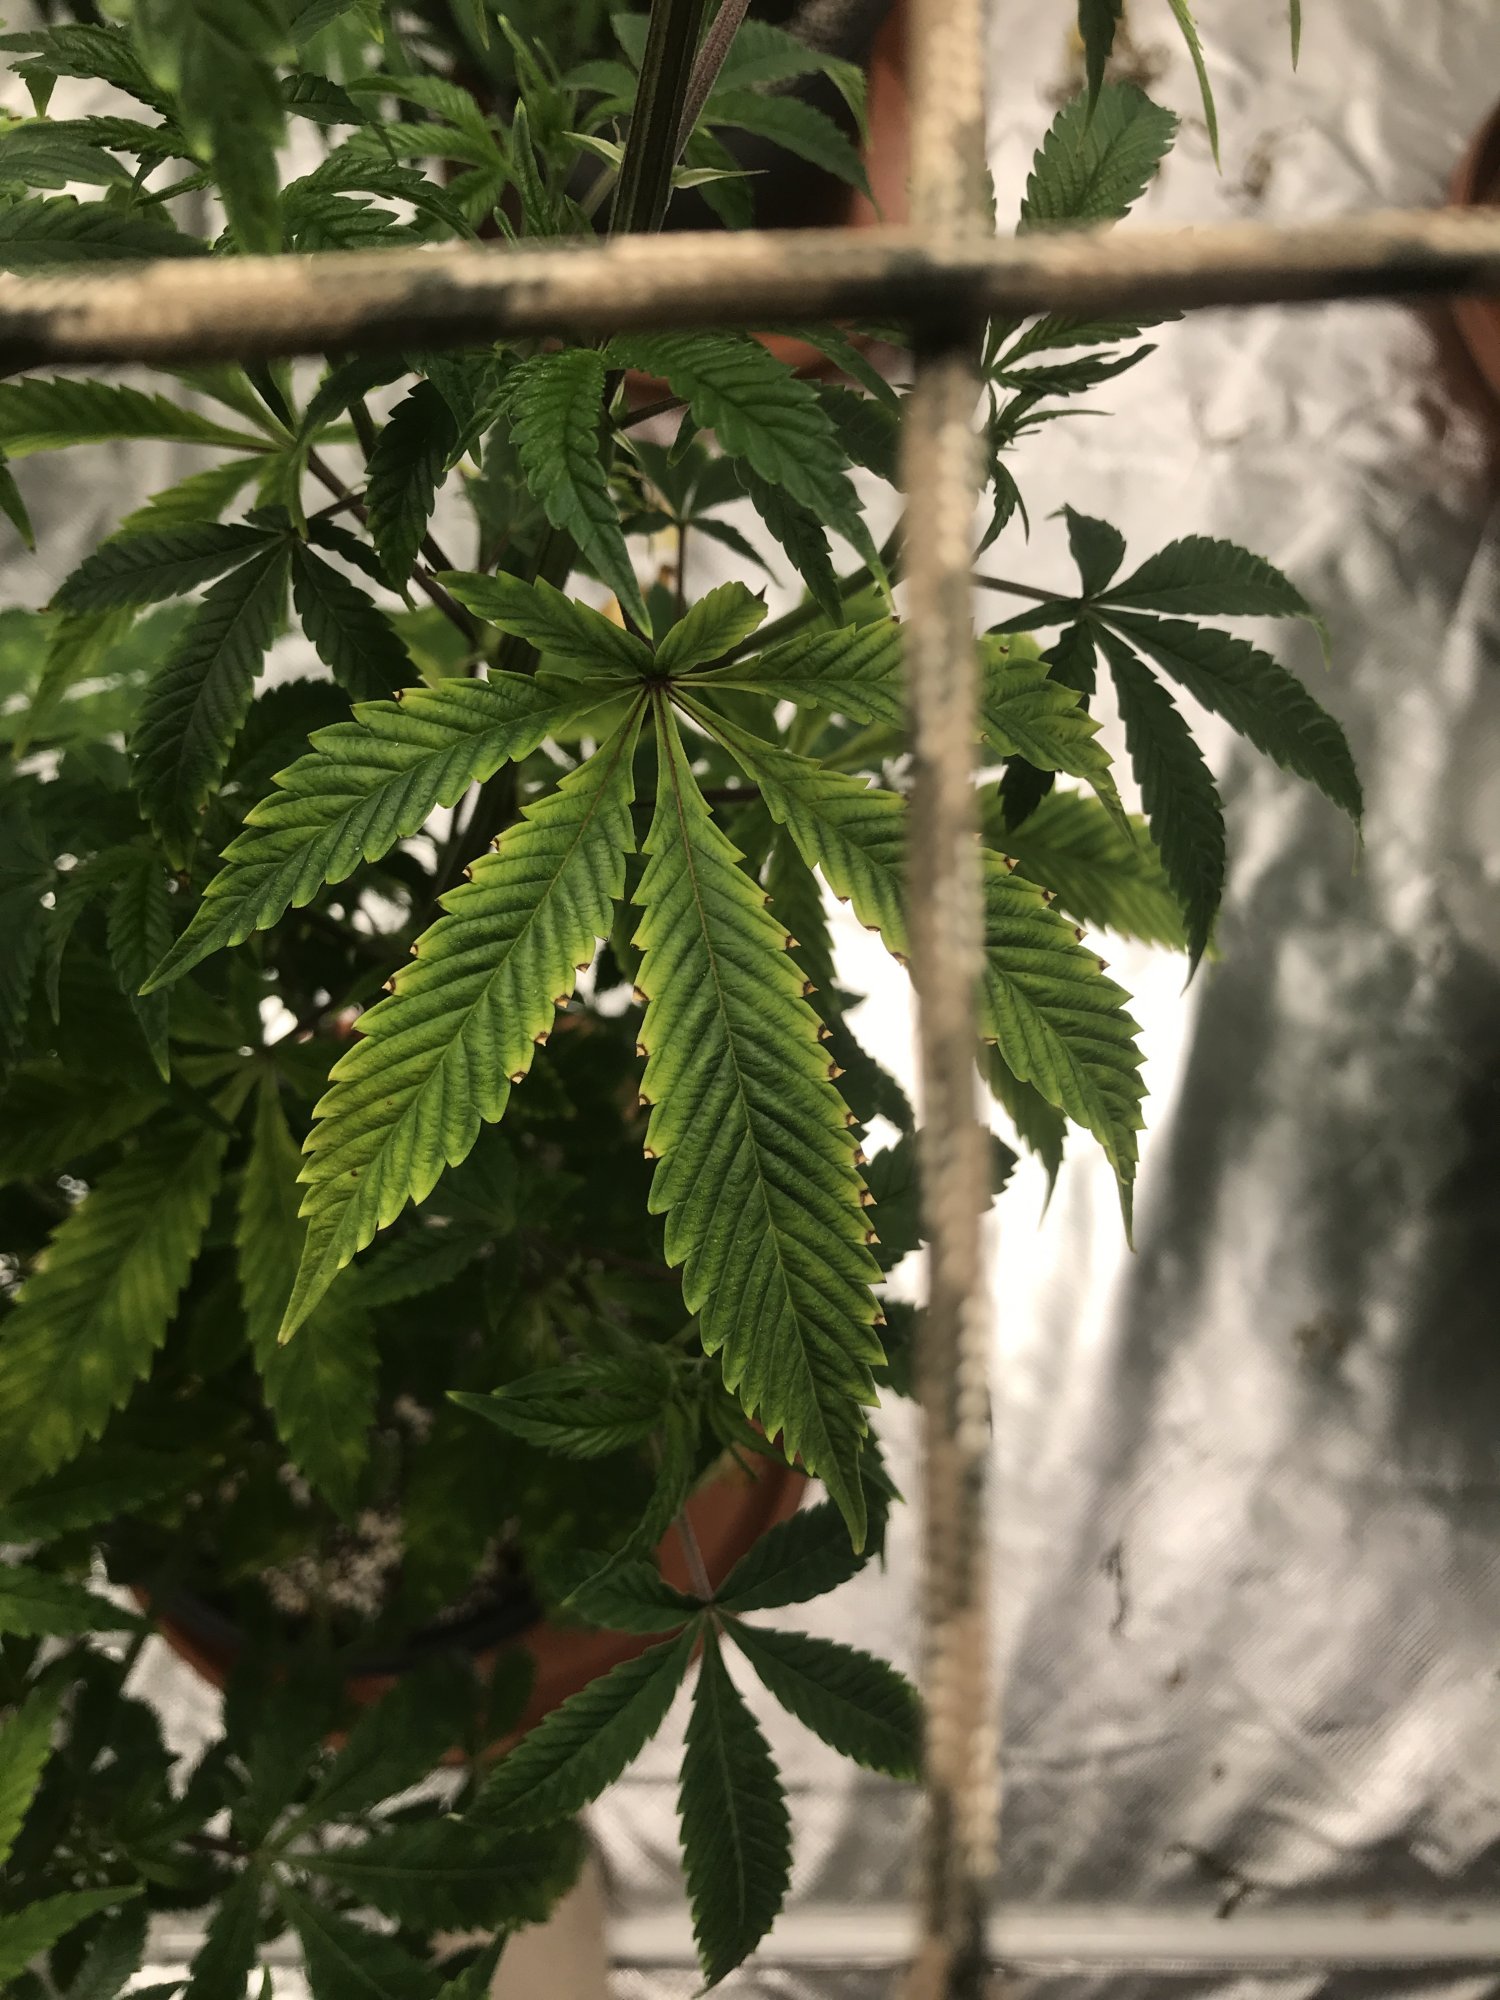 Need help 1st grow deficiency or excess 2